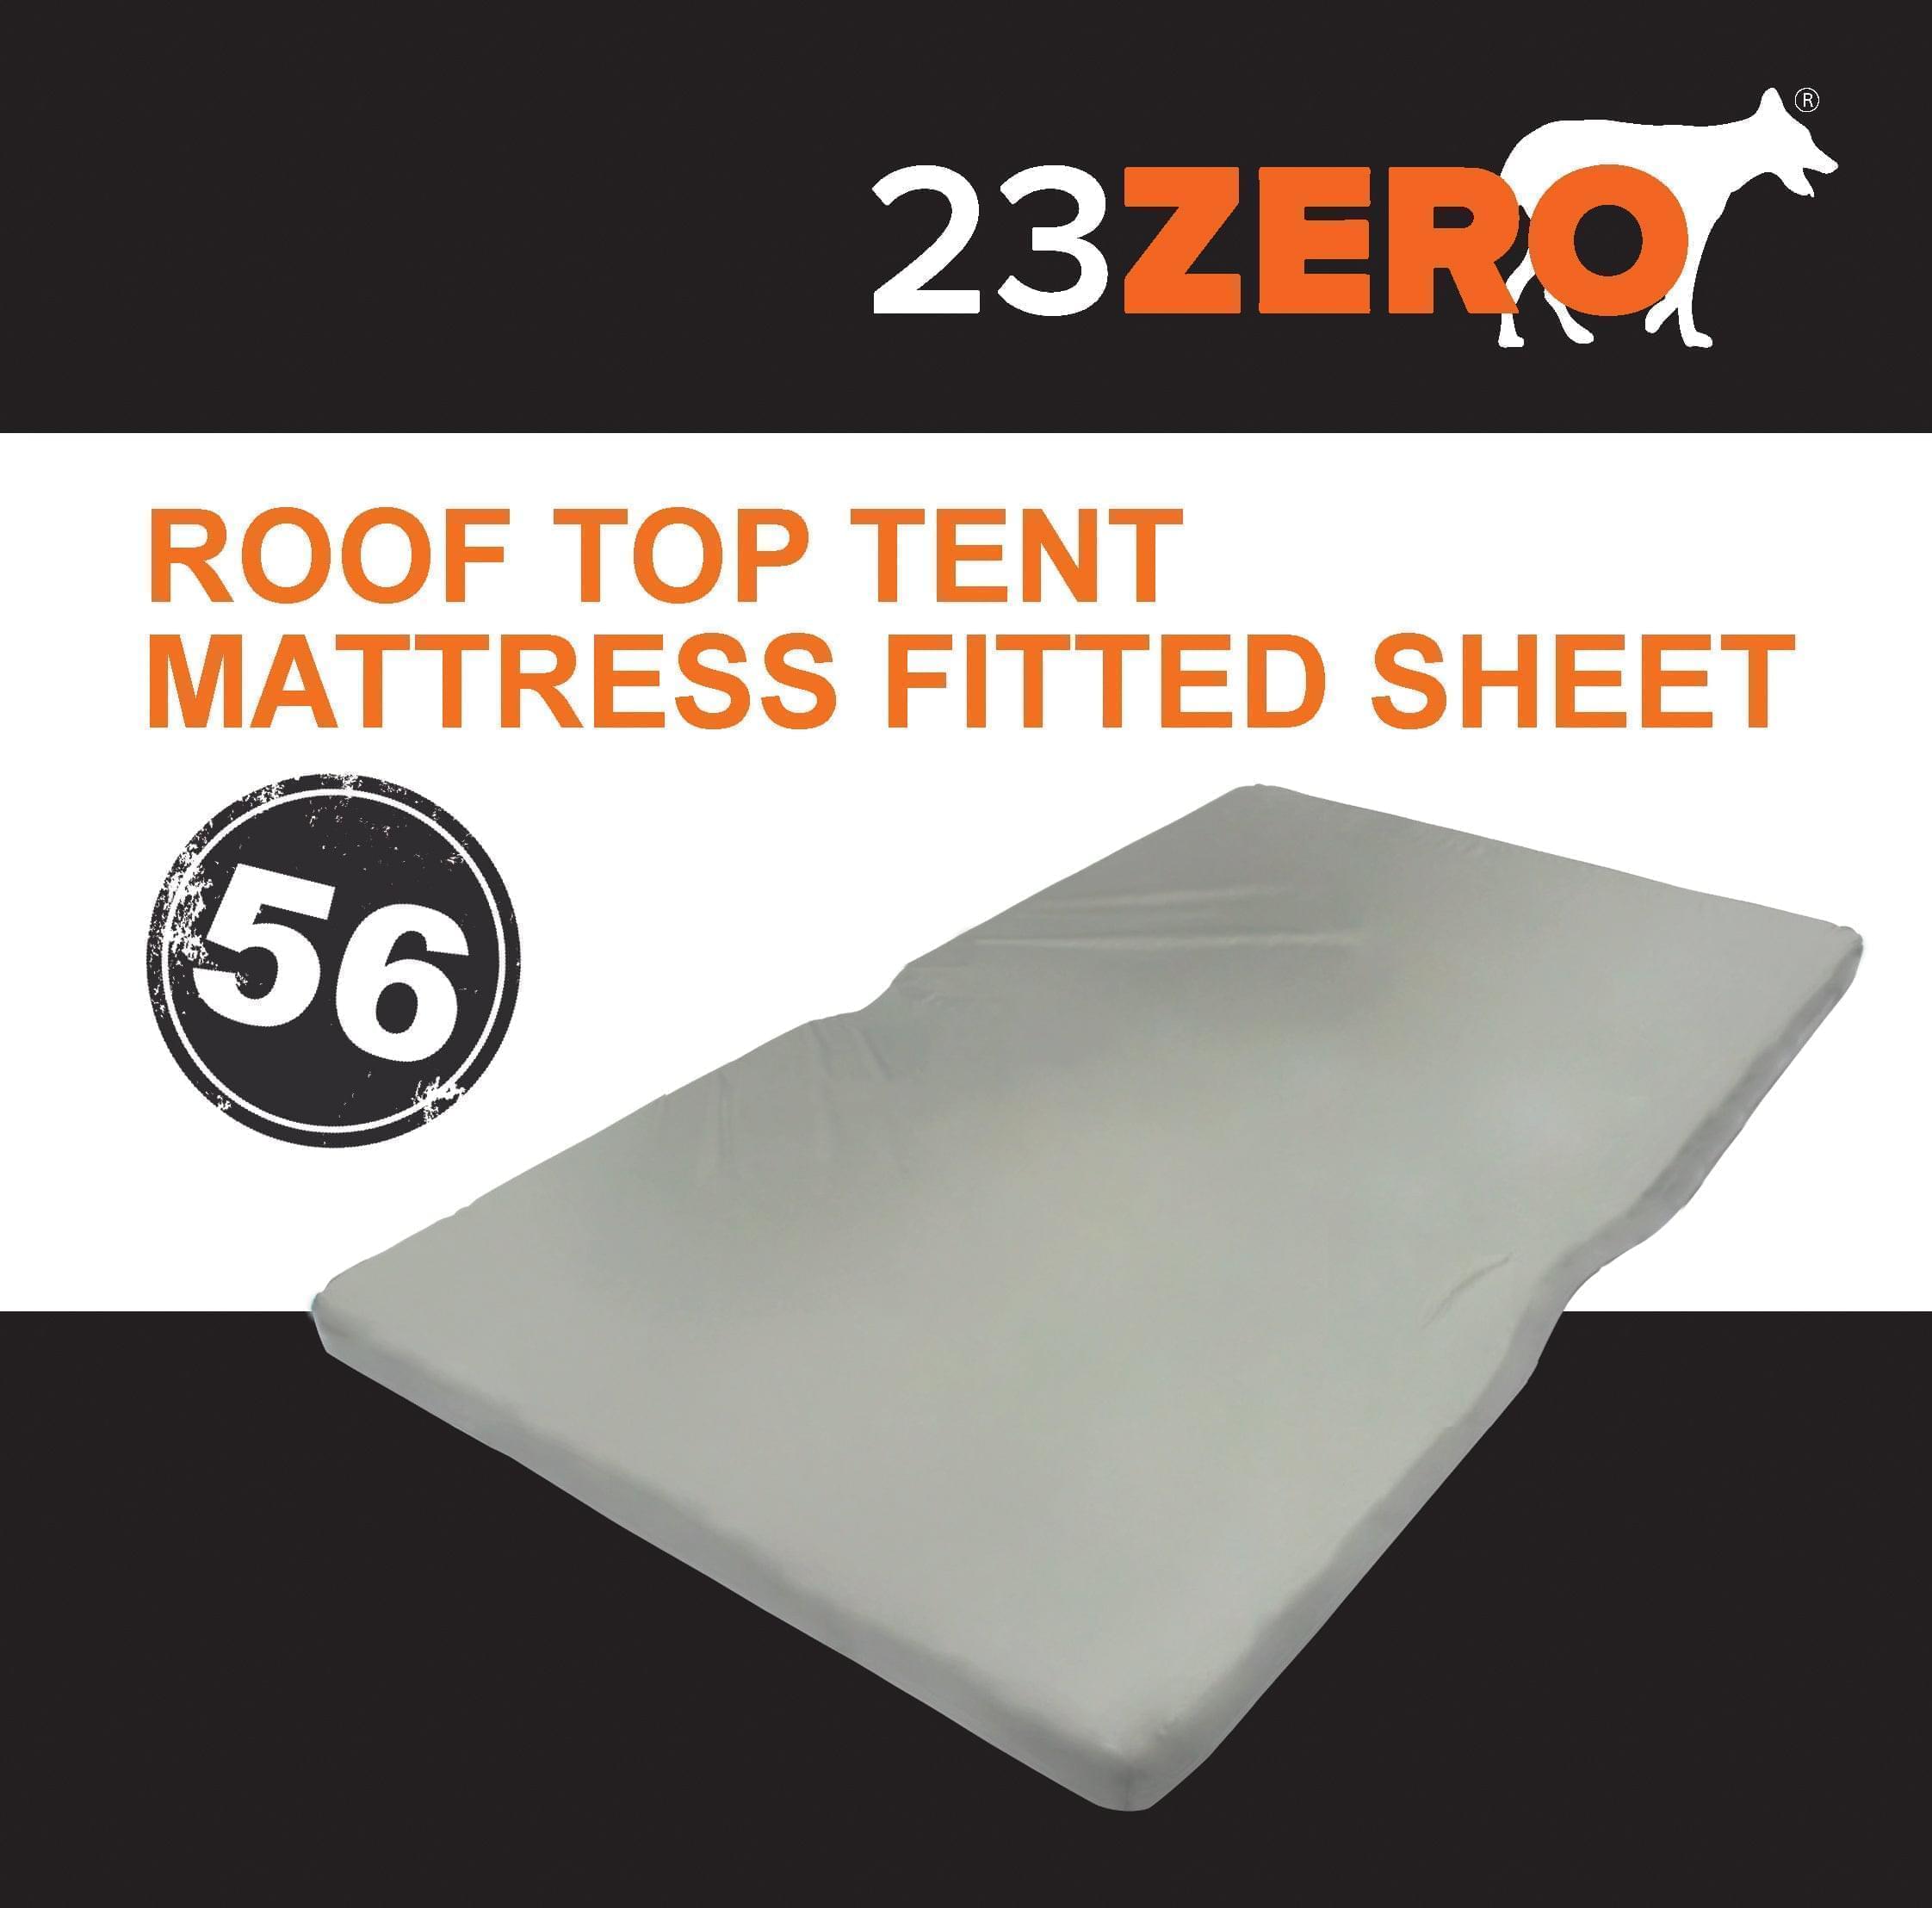 23Zero Roof Top Tent Mattress Fitted Sheets